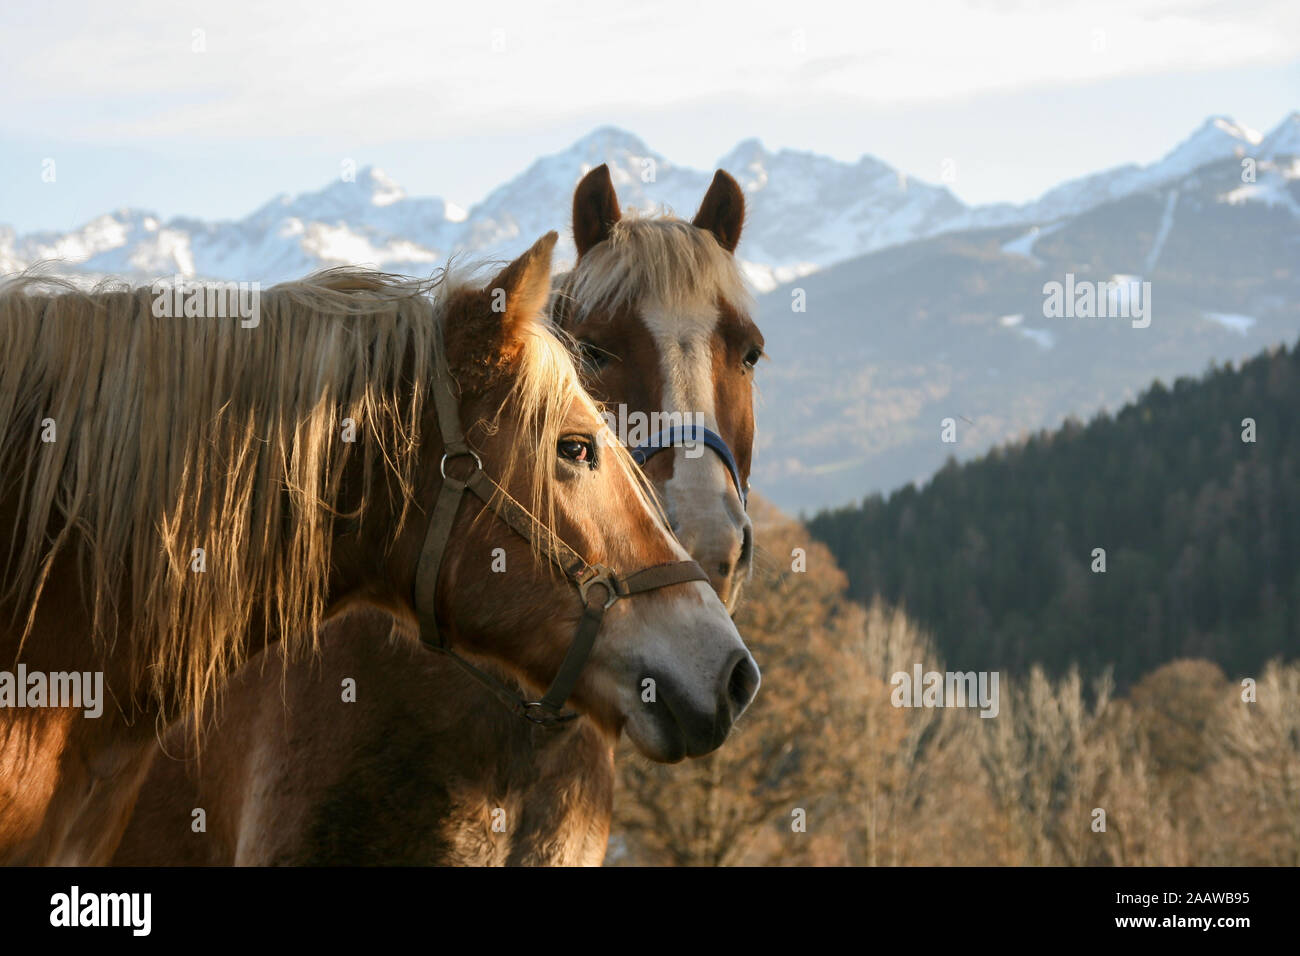 Two horses looking into the far. Grasping a view of the snow covered mountains in the back while enjoying the sun shining onto their faces. Stock Photo